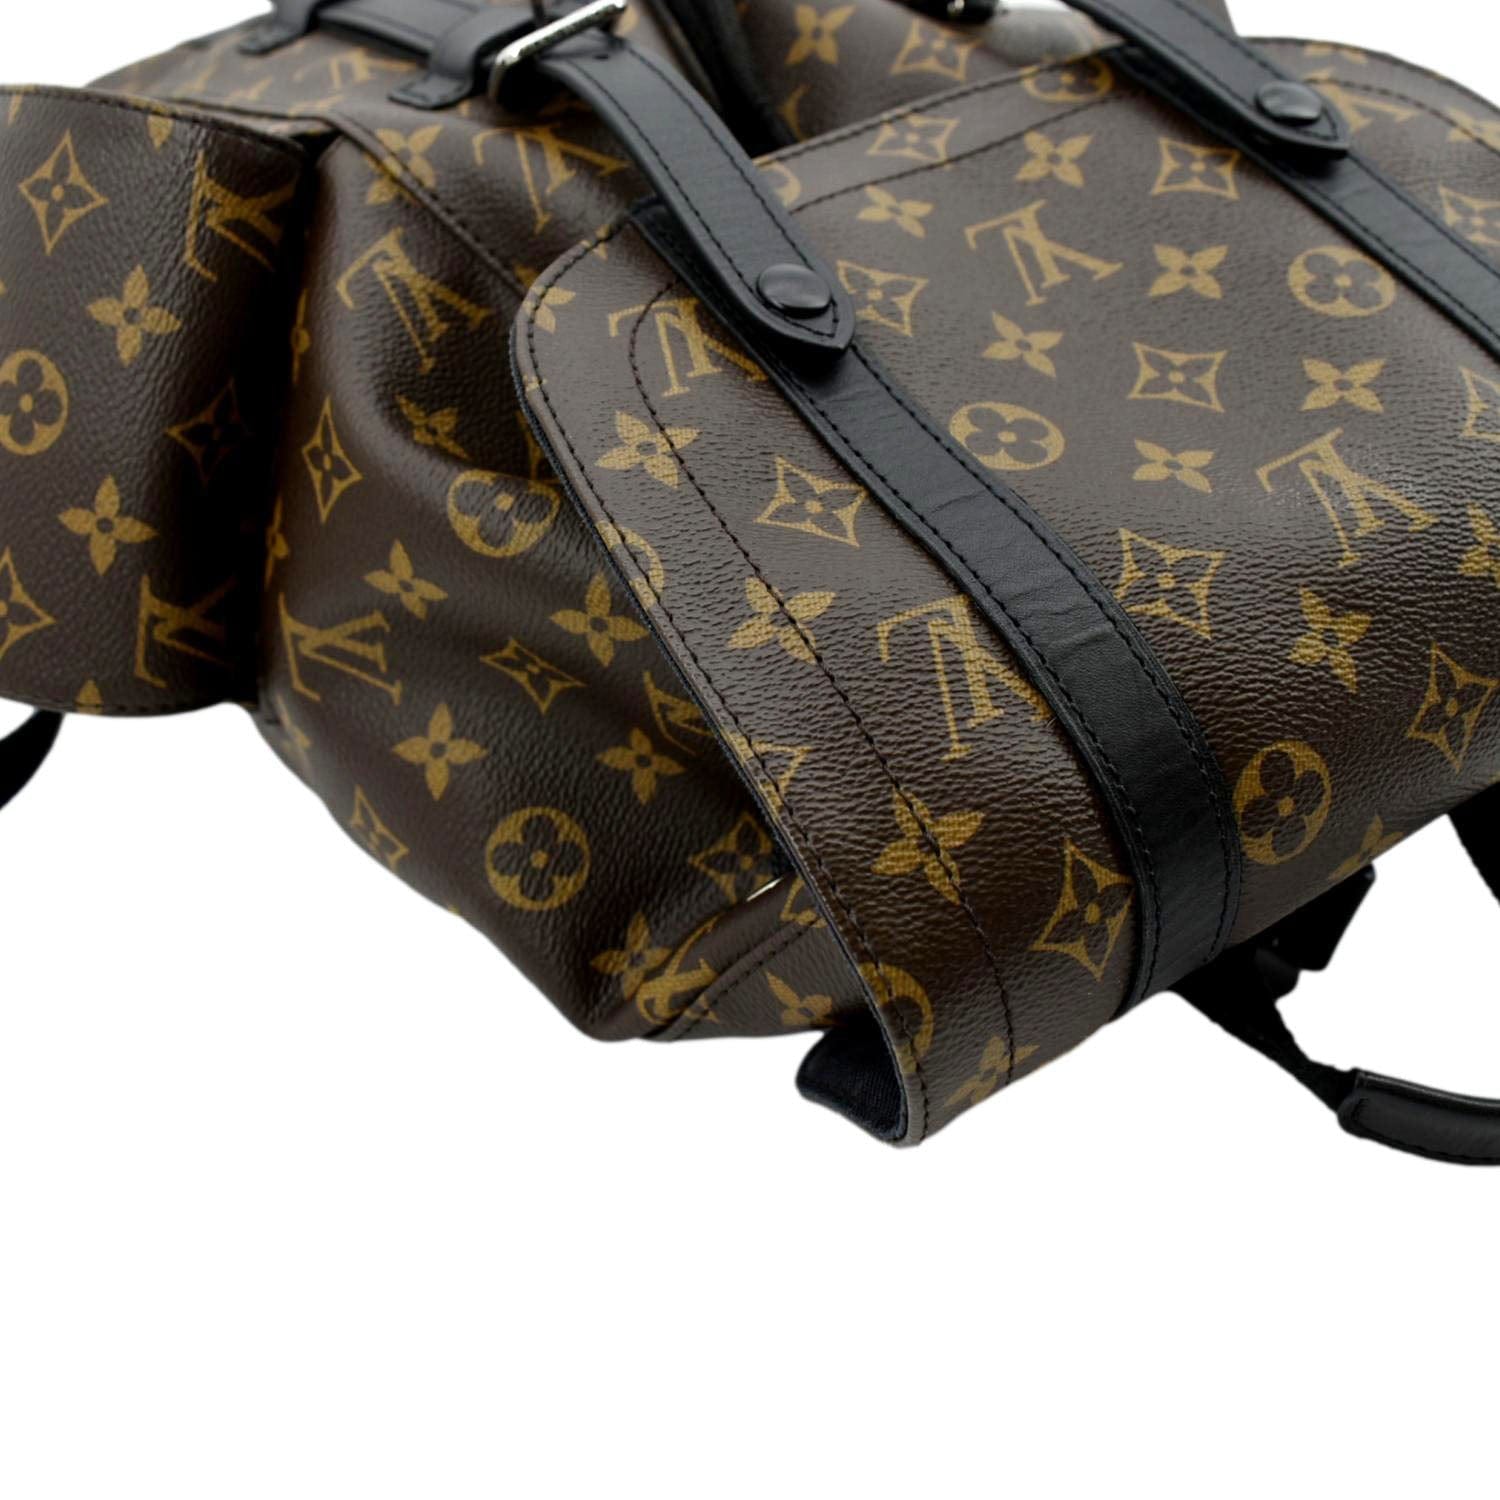 Louis Vuitton 2022 No. 7 Monogram Christopher MM Backpack - Brown